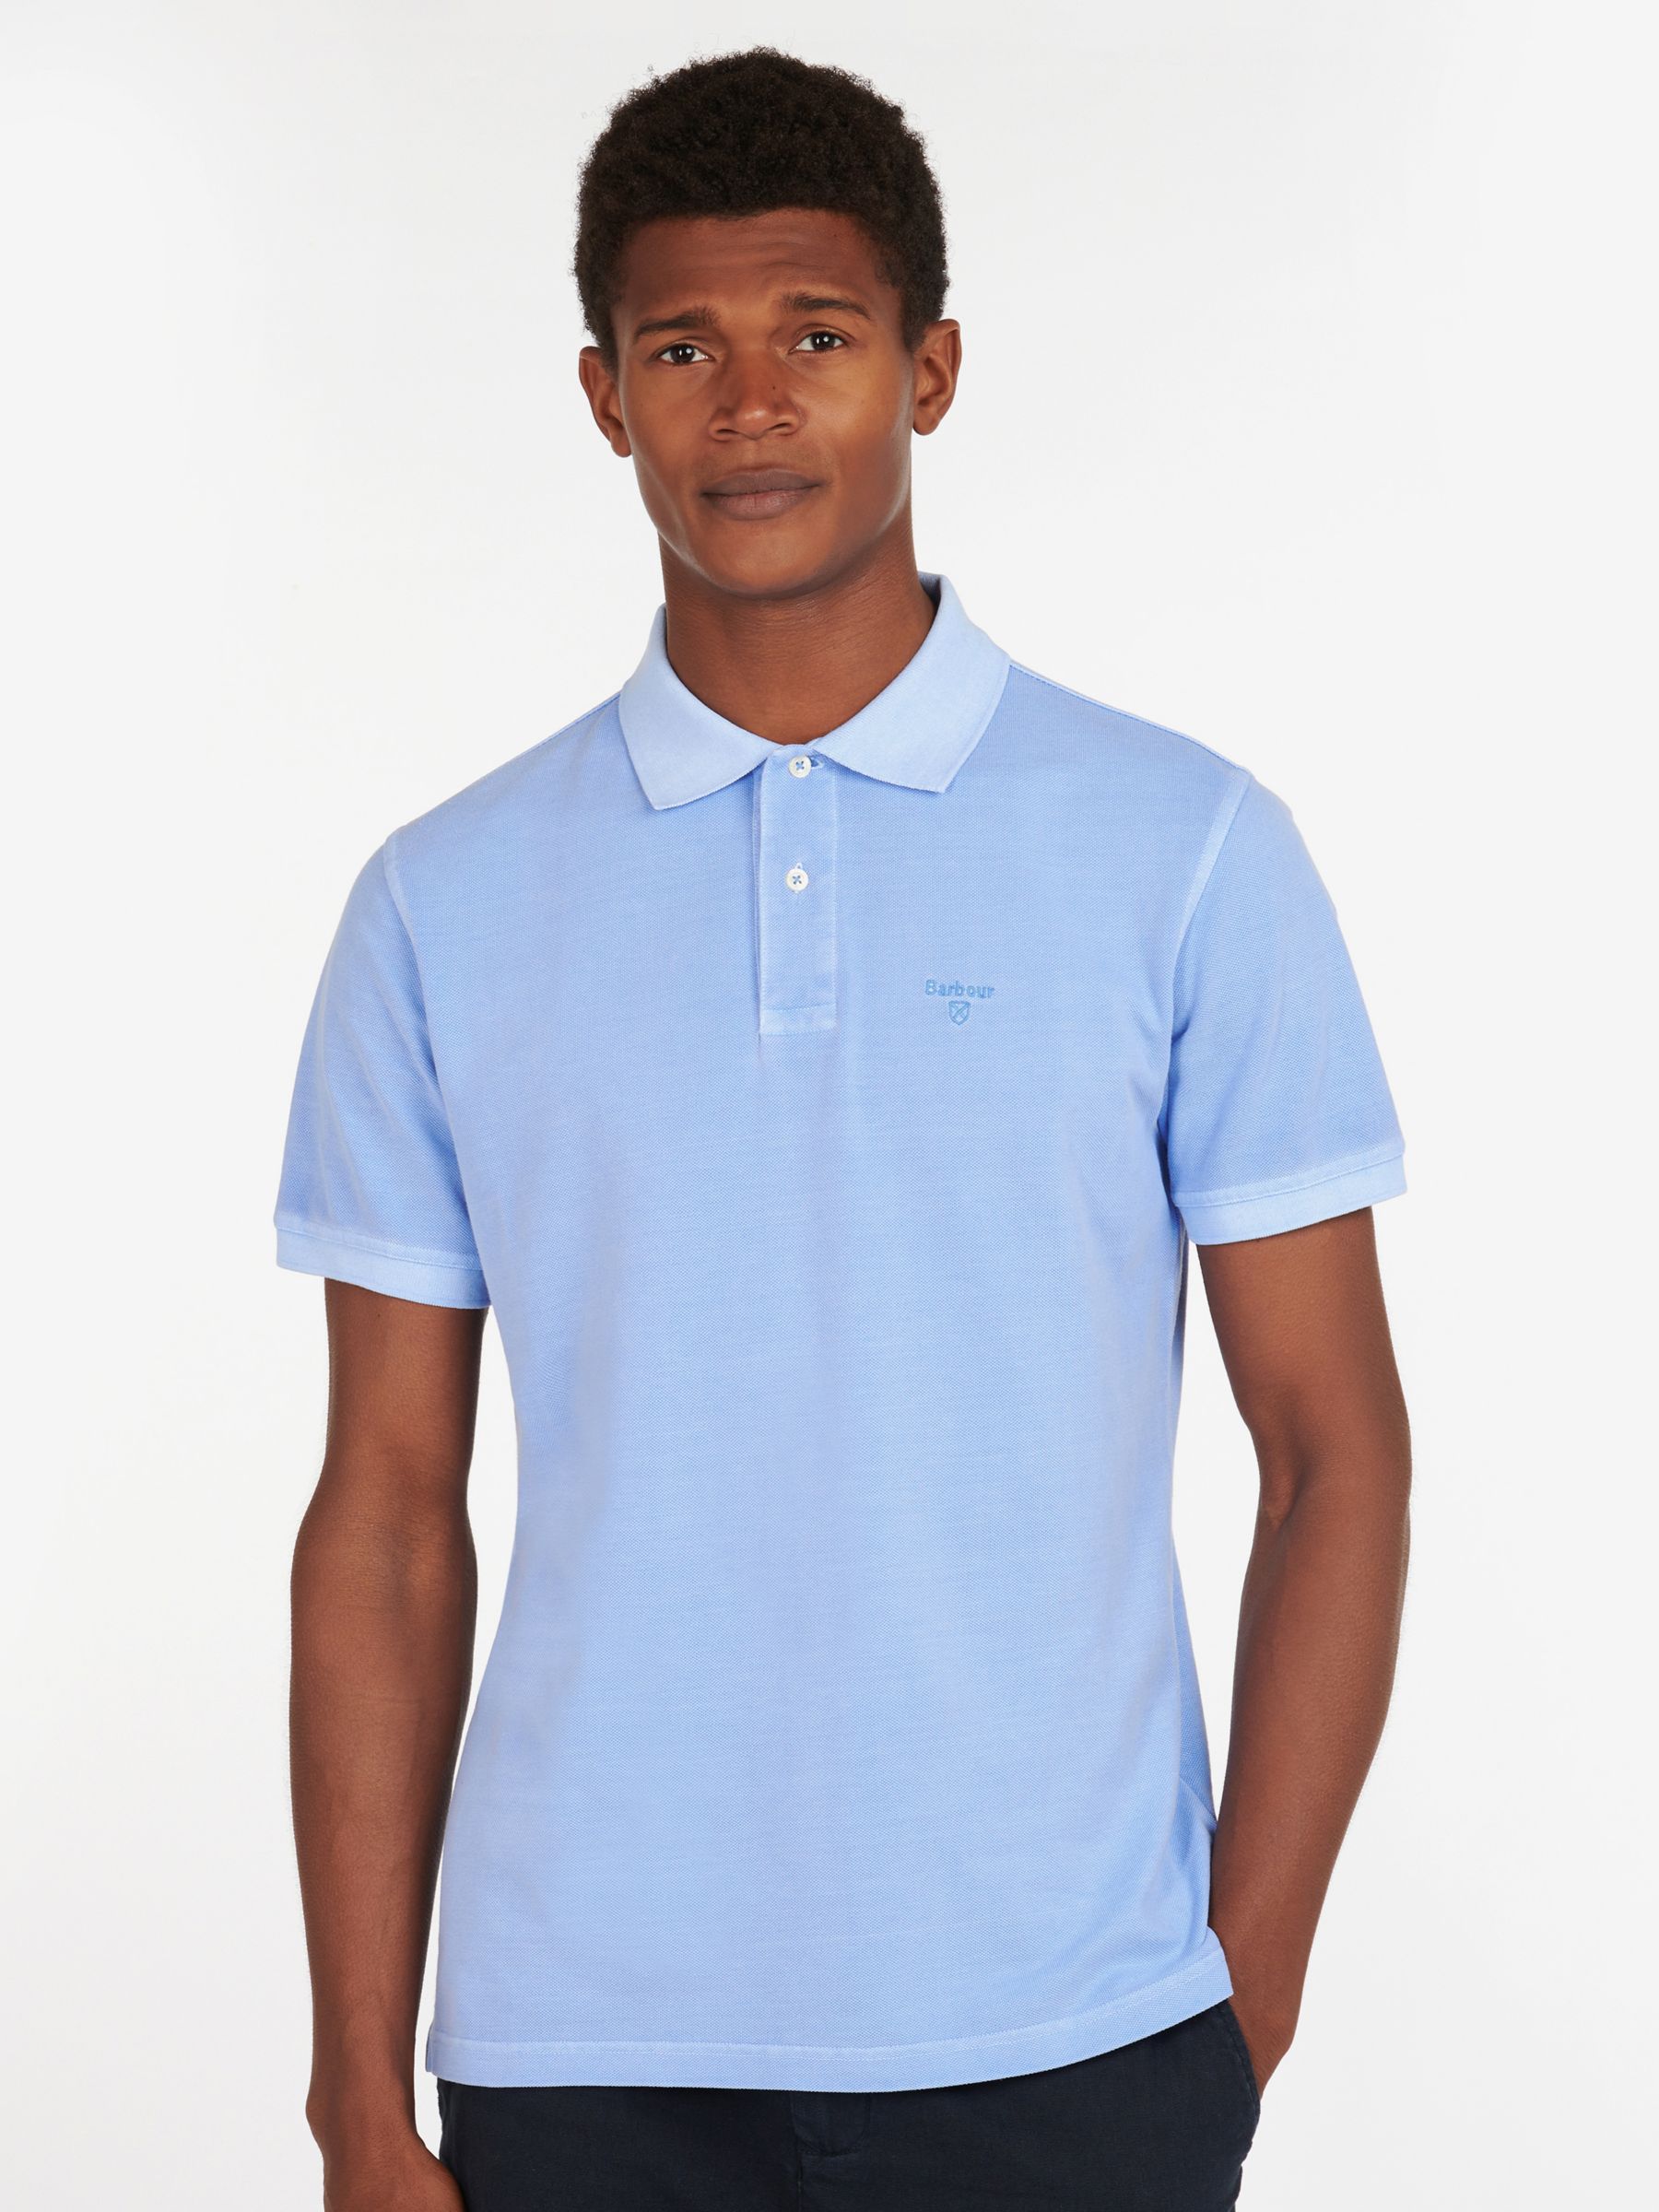 Barbour Washed Sports Polo Shirt, Blue, XL